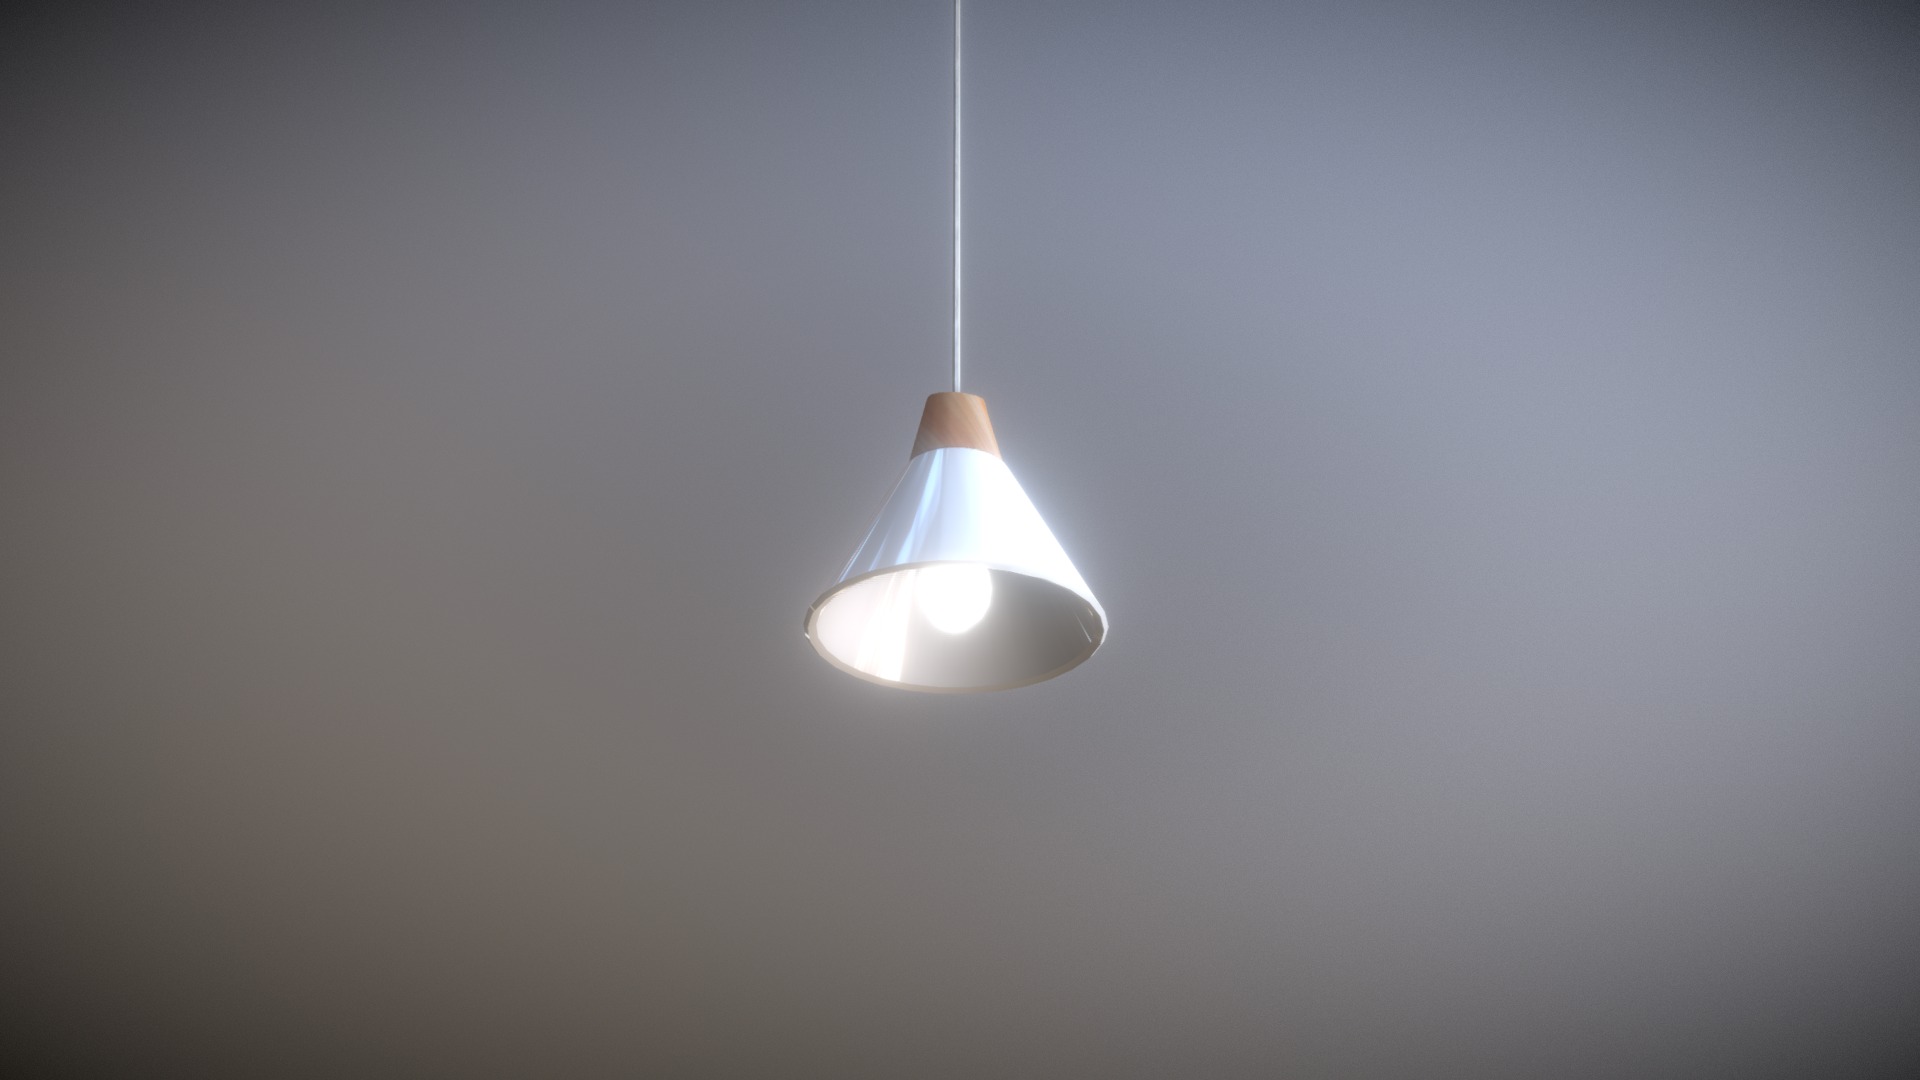 3D model Hanging Ceiling Lamp low-poly game ready - This is a 3D model of the Hanging Ceiling Lamp low-poly game ready. The 3D model is about a light fixture on a ceiling.